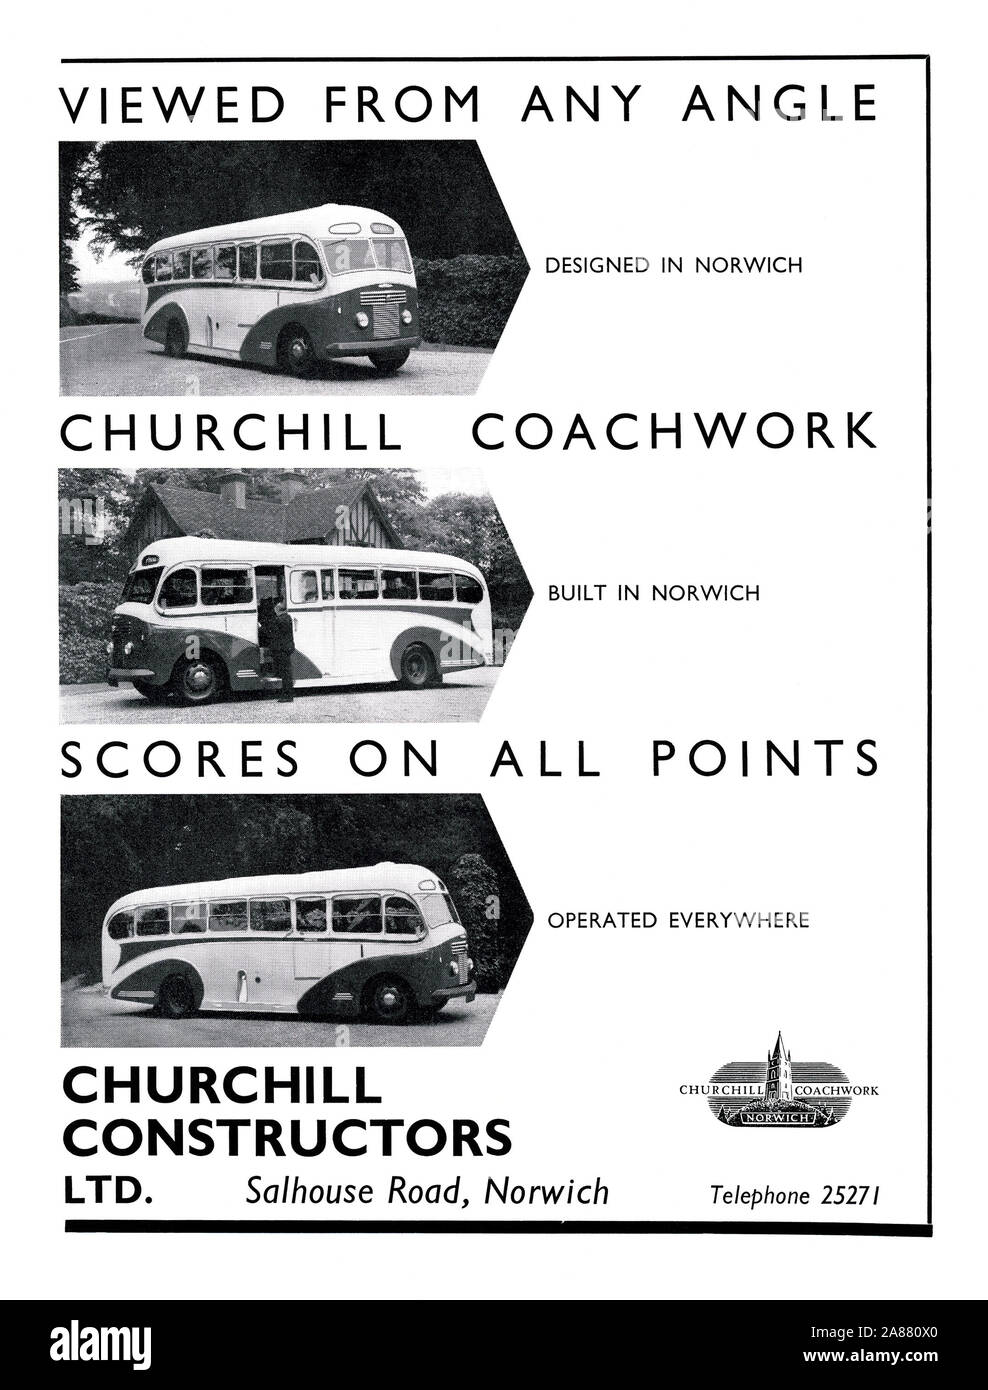 Advert for Churchill Constructors Ltd of Salhouse Road, Norwich, Norfolk, England, UK, 1951. As seen in the photographs, its main coachbuilding activity was constructing coach bodies on the chassis and engine of a Commer 'Avenger'. The chassis had a diesel engine and was built by the Rootes Group in the 1950s and 1960s. It was the first diesel engine used by that company. The Churchill-bodied coaches usually sat 34 passengers. Stock Photo